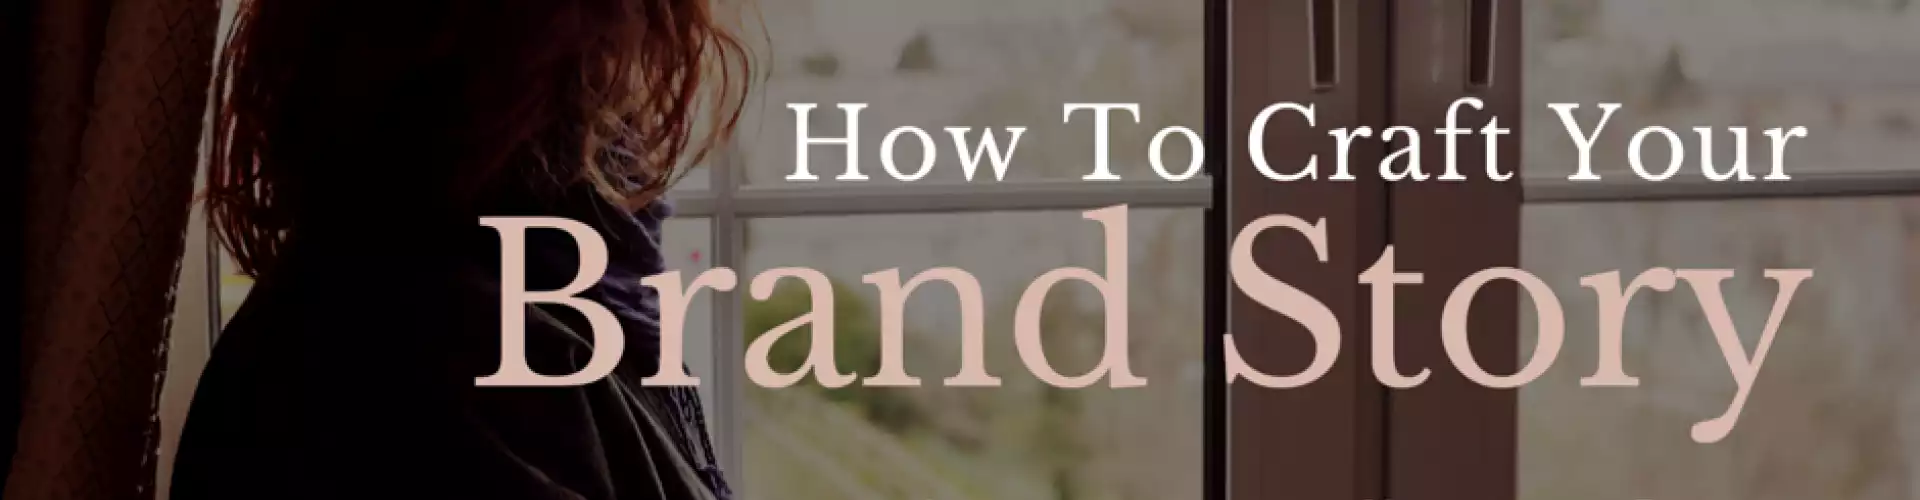 How To Craft Your Brand Story